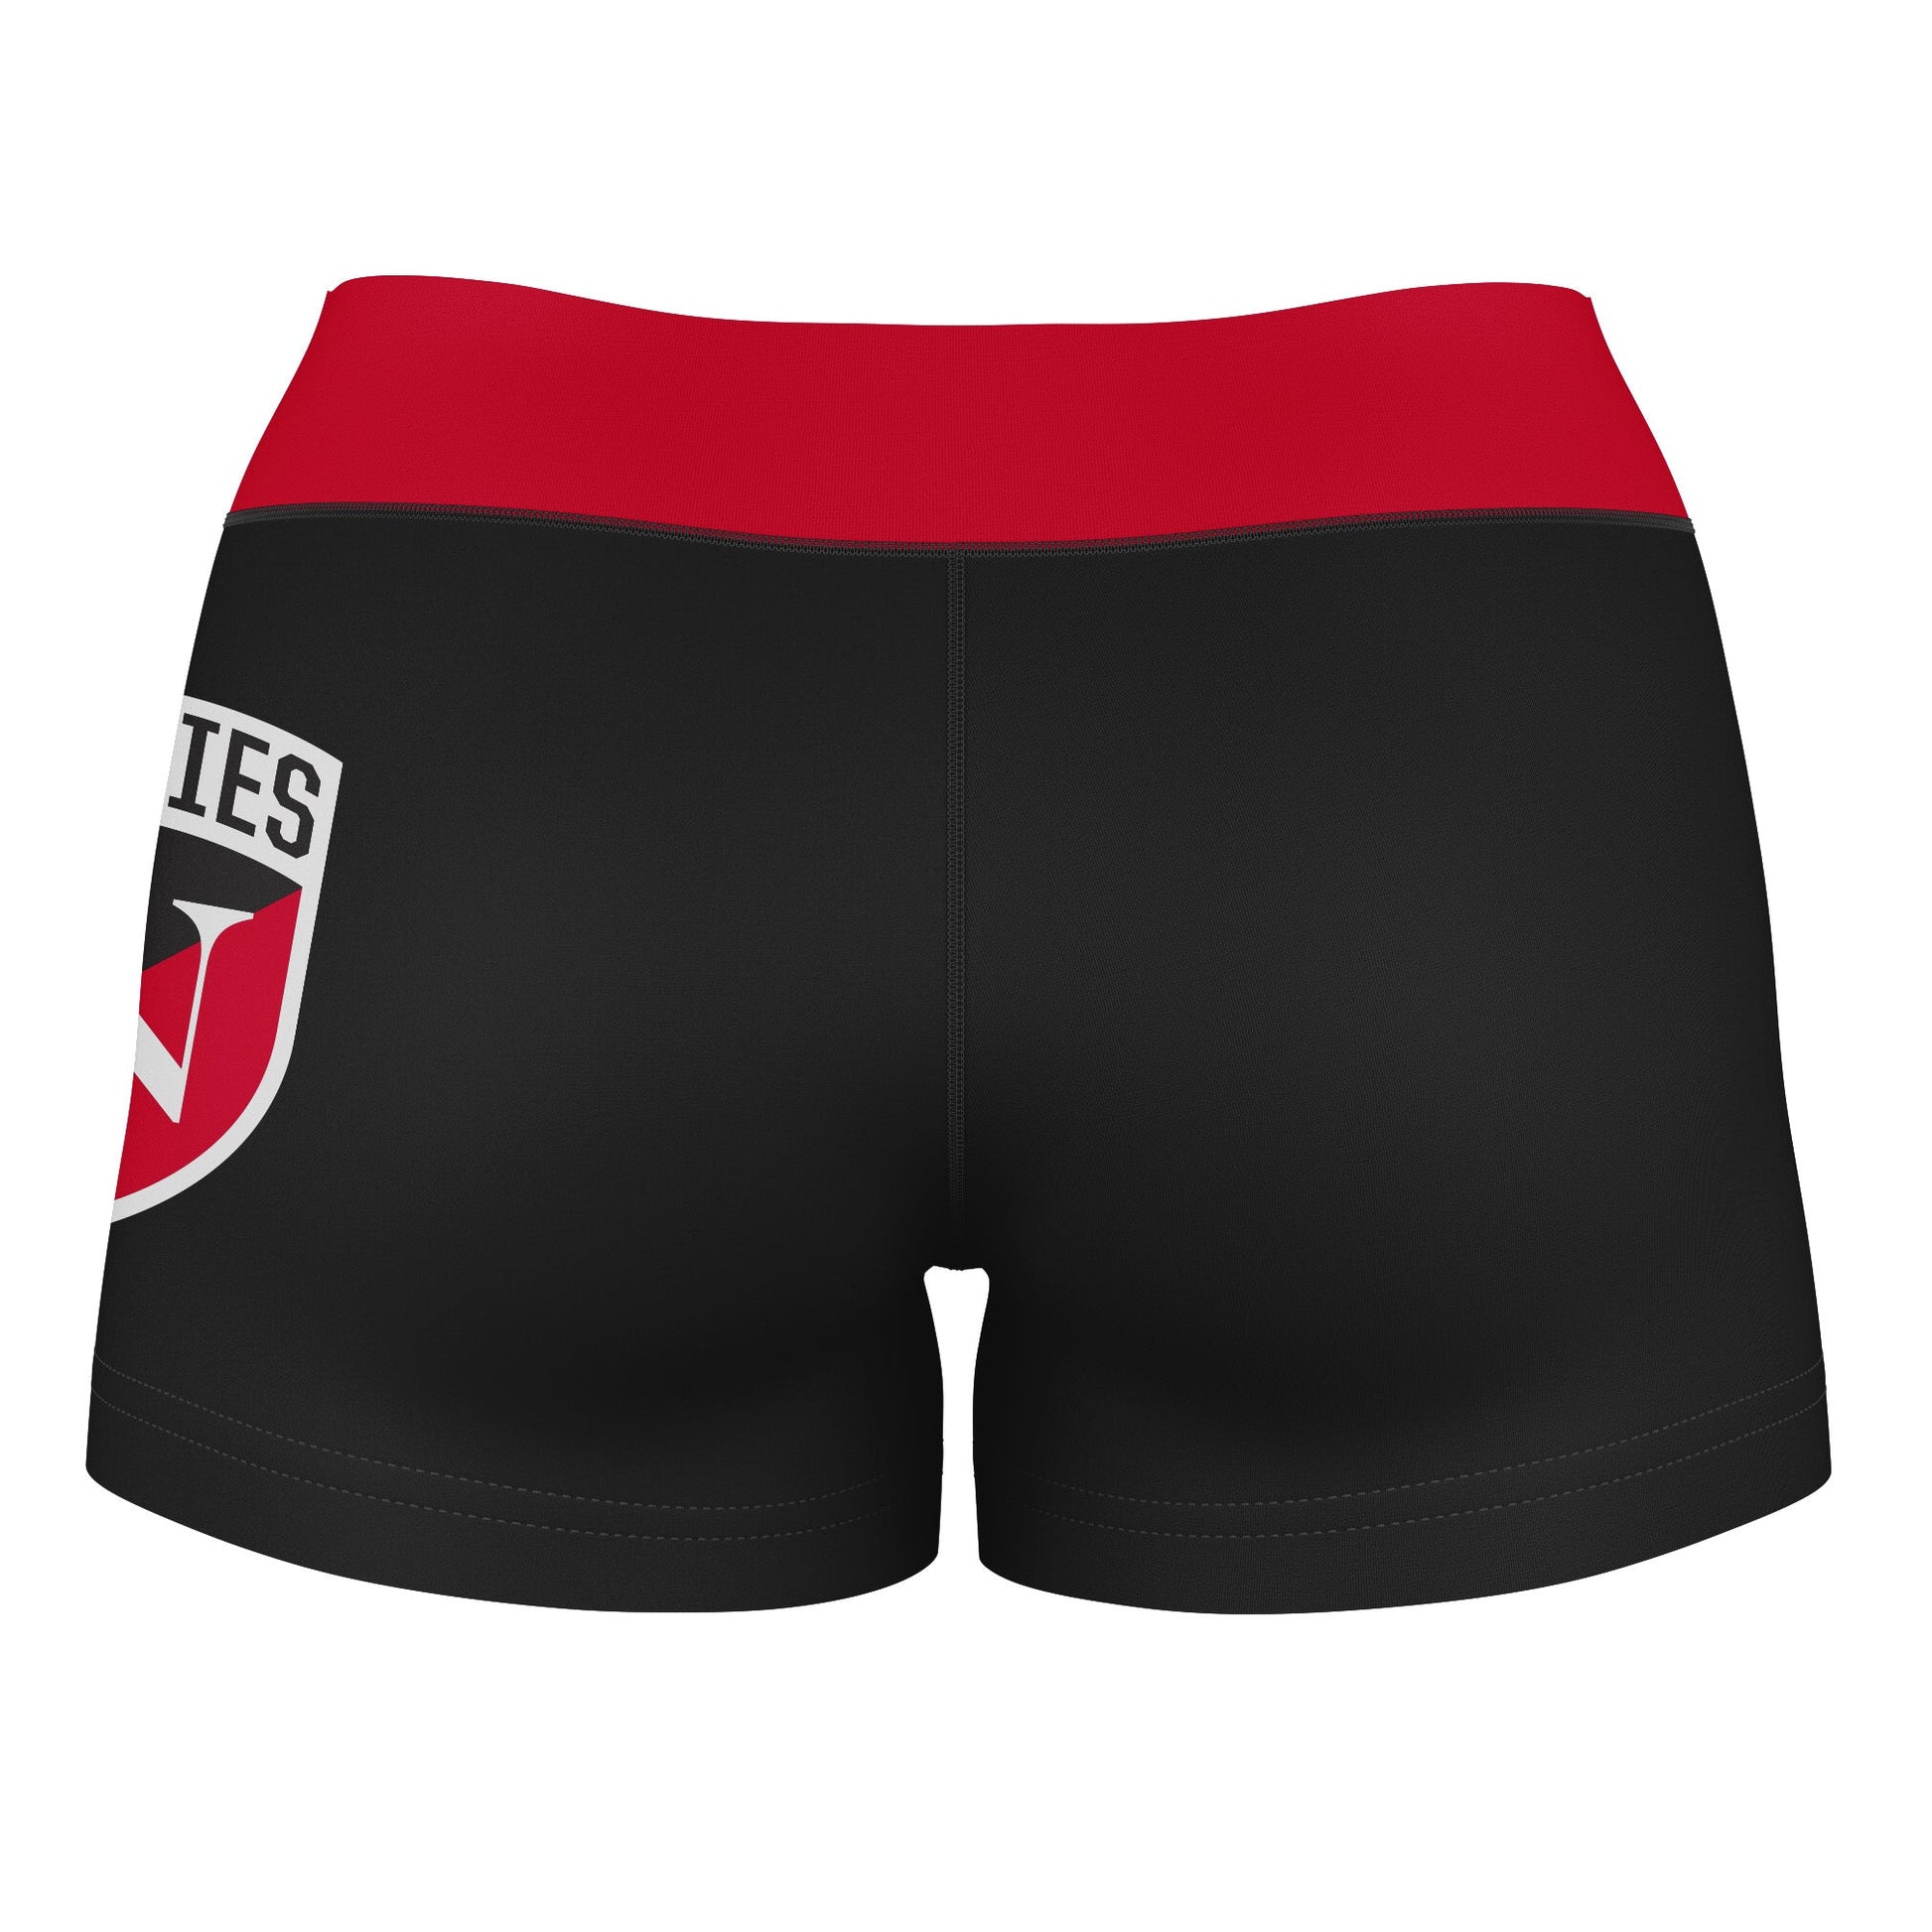 Northeastern University Huskies Logo on Thigh and Waistband Black and Red Women Yoga Booty Workout Shorts 3.75 Inseam" - Vive La F̻te - Online Apparel Store